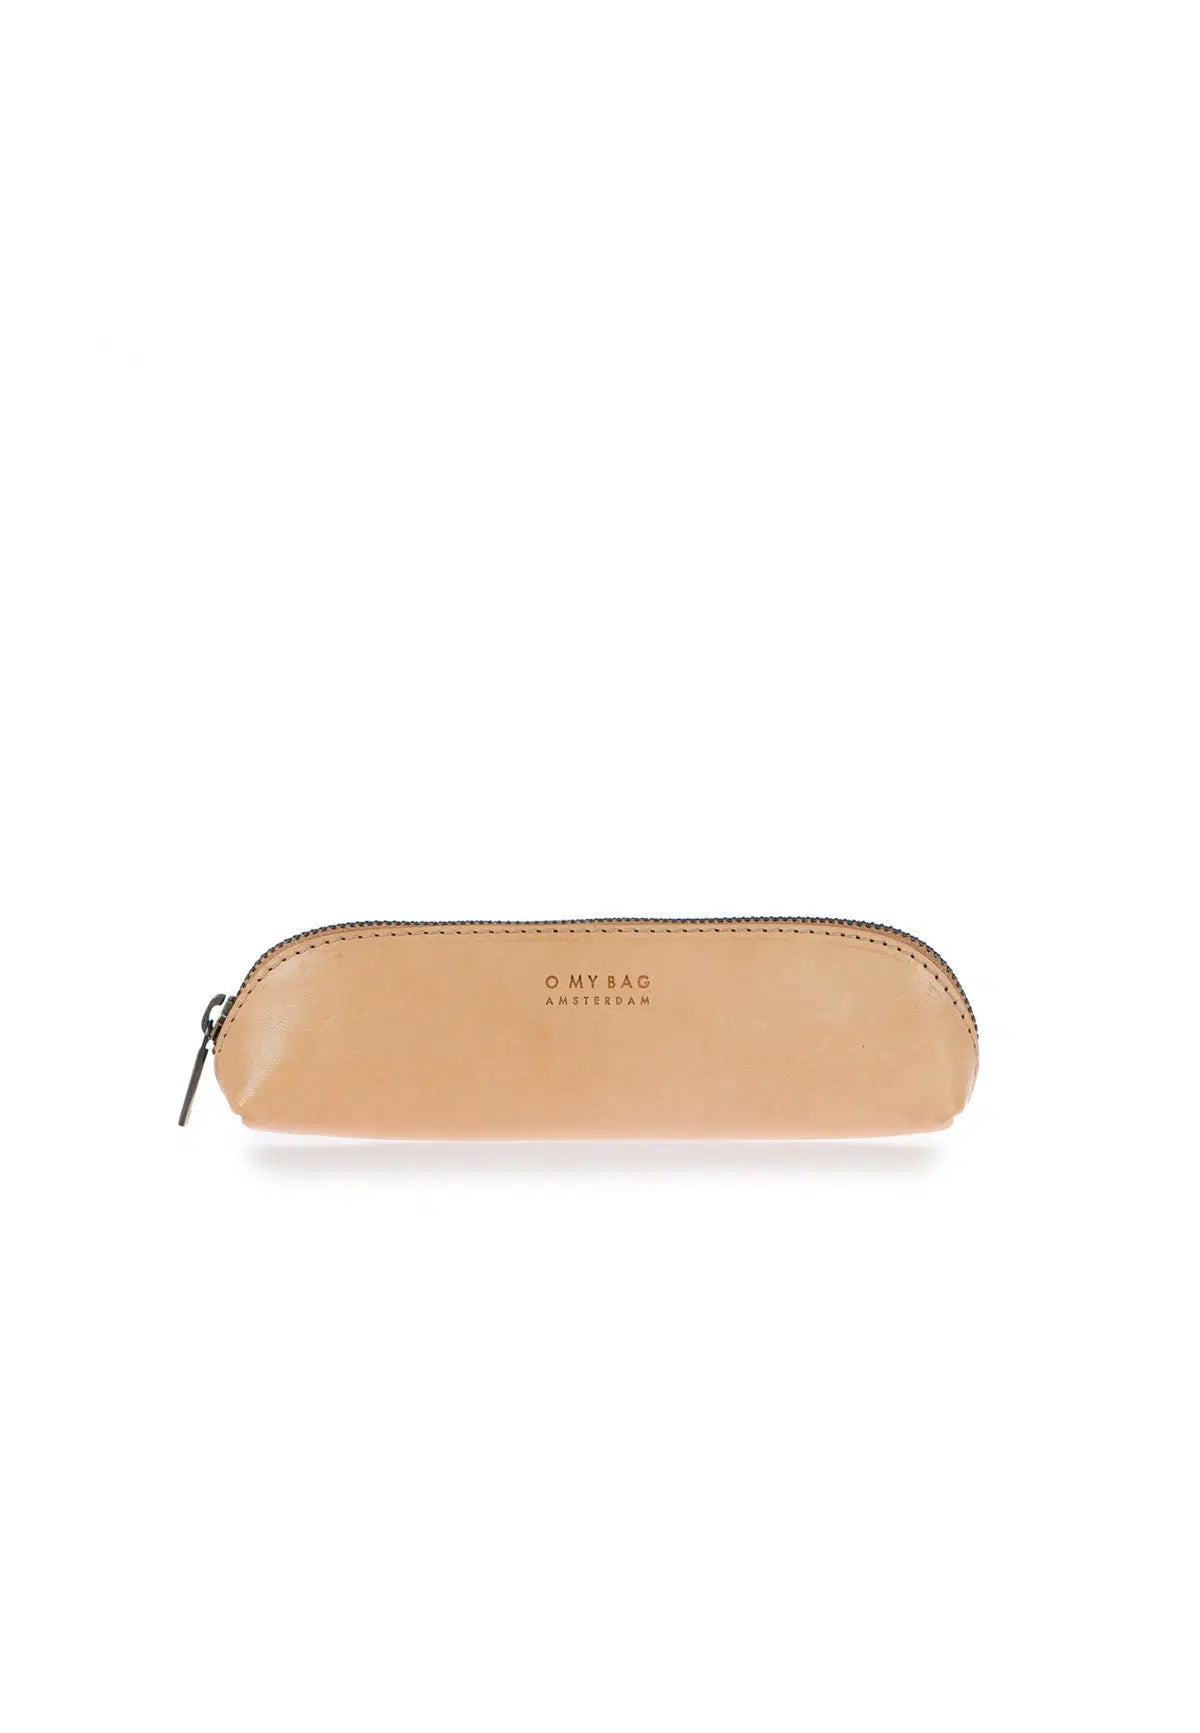 PENCIL CASE SMALL NATURAL CLASSIC LEATHER